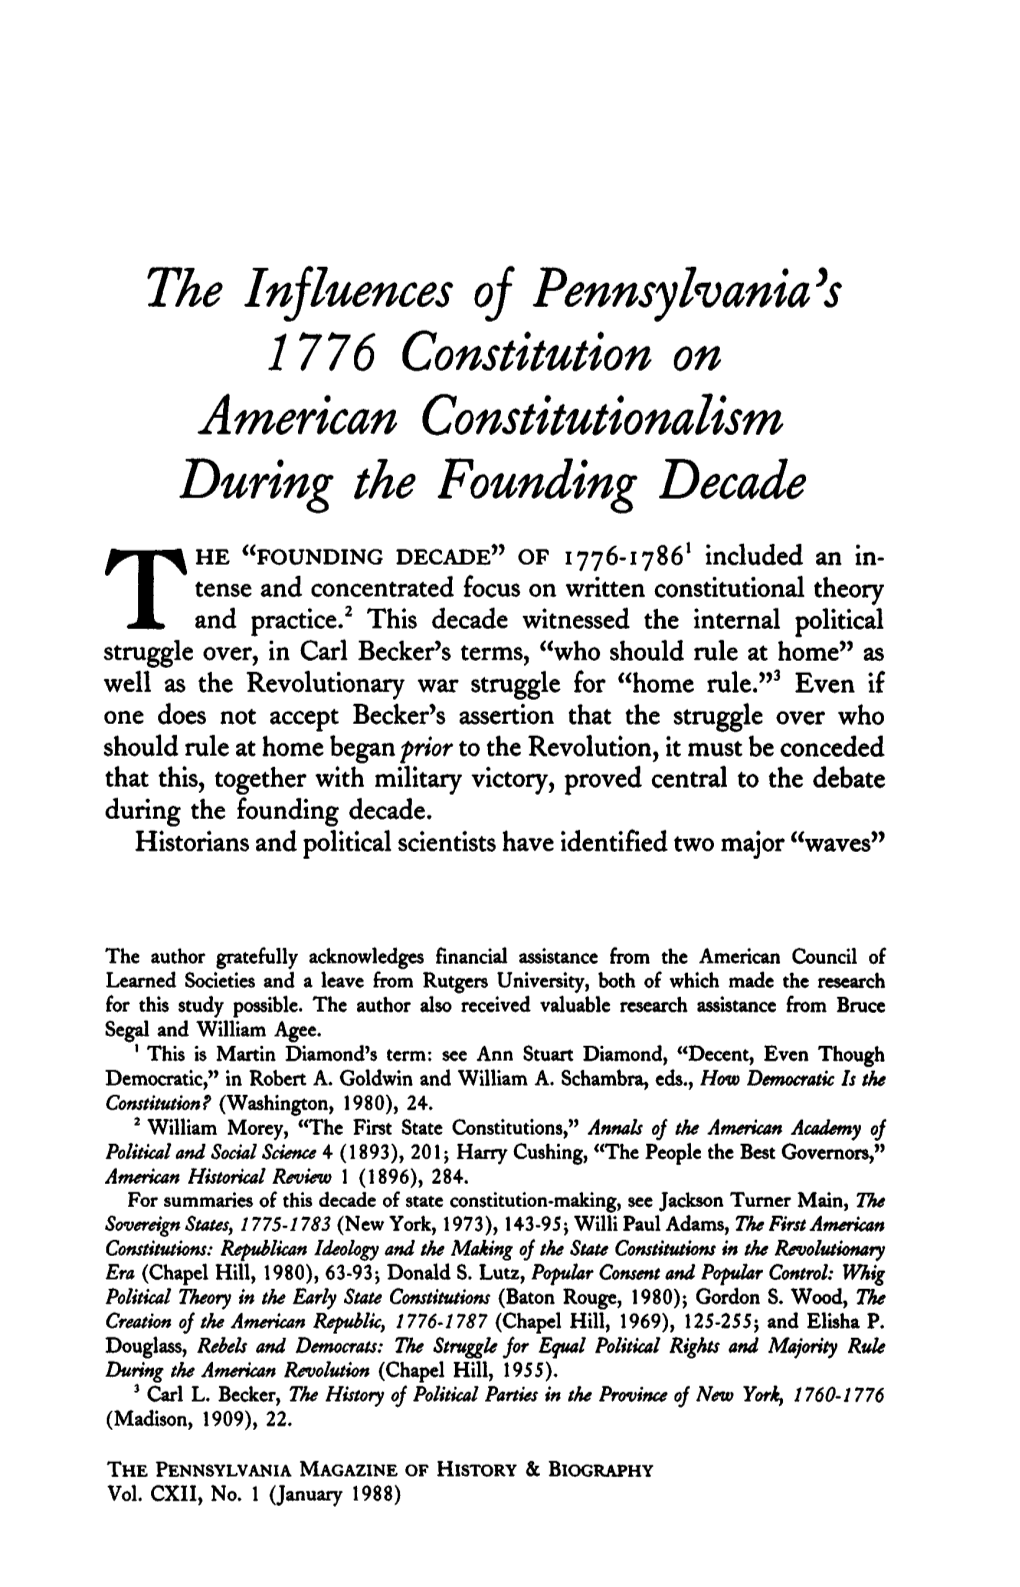 The Influences of Pennsylvania's 1776 Constitution on American Constitutionalism During the Founding Decade